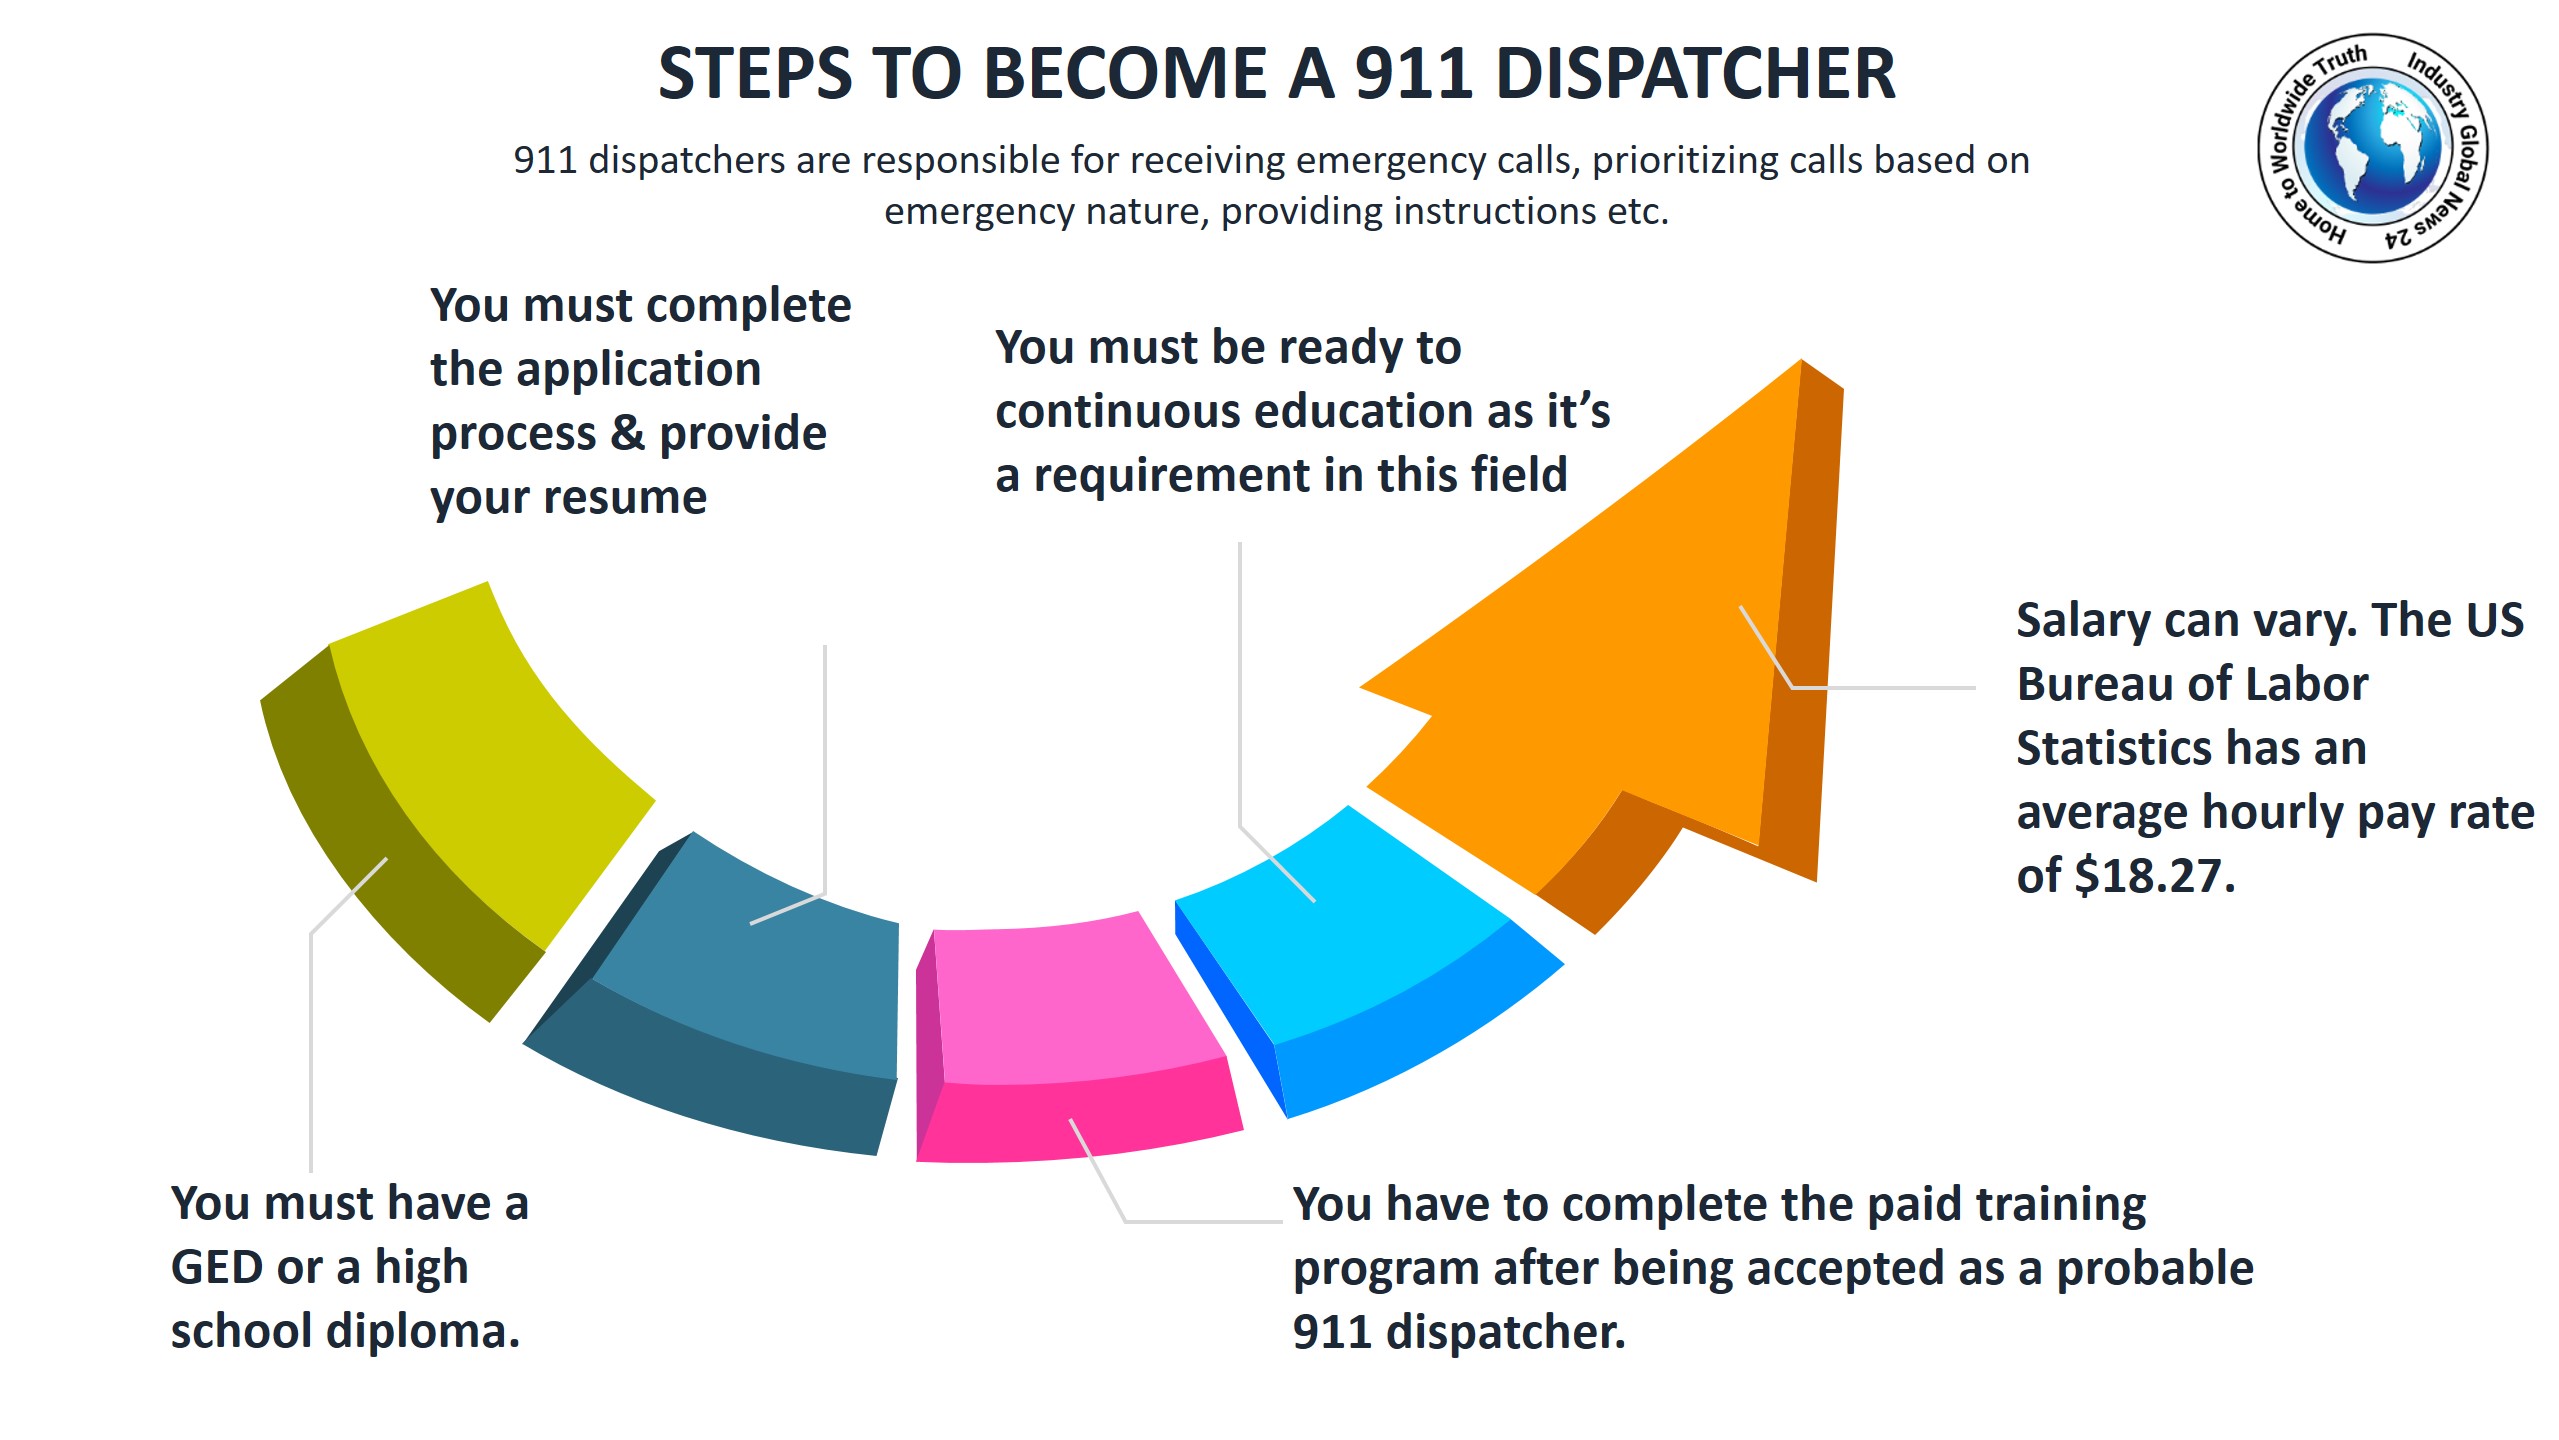 Steps to become a 911 dispatcher